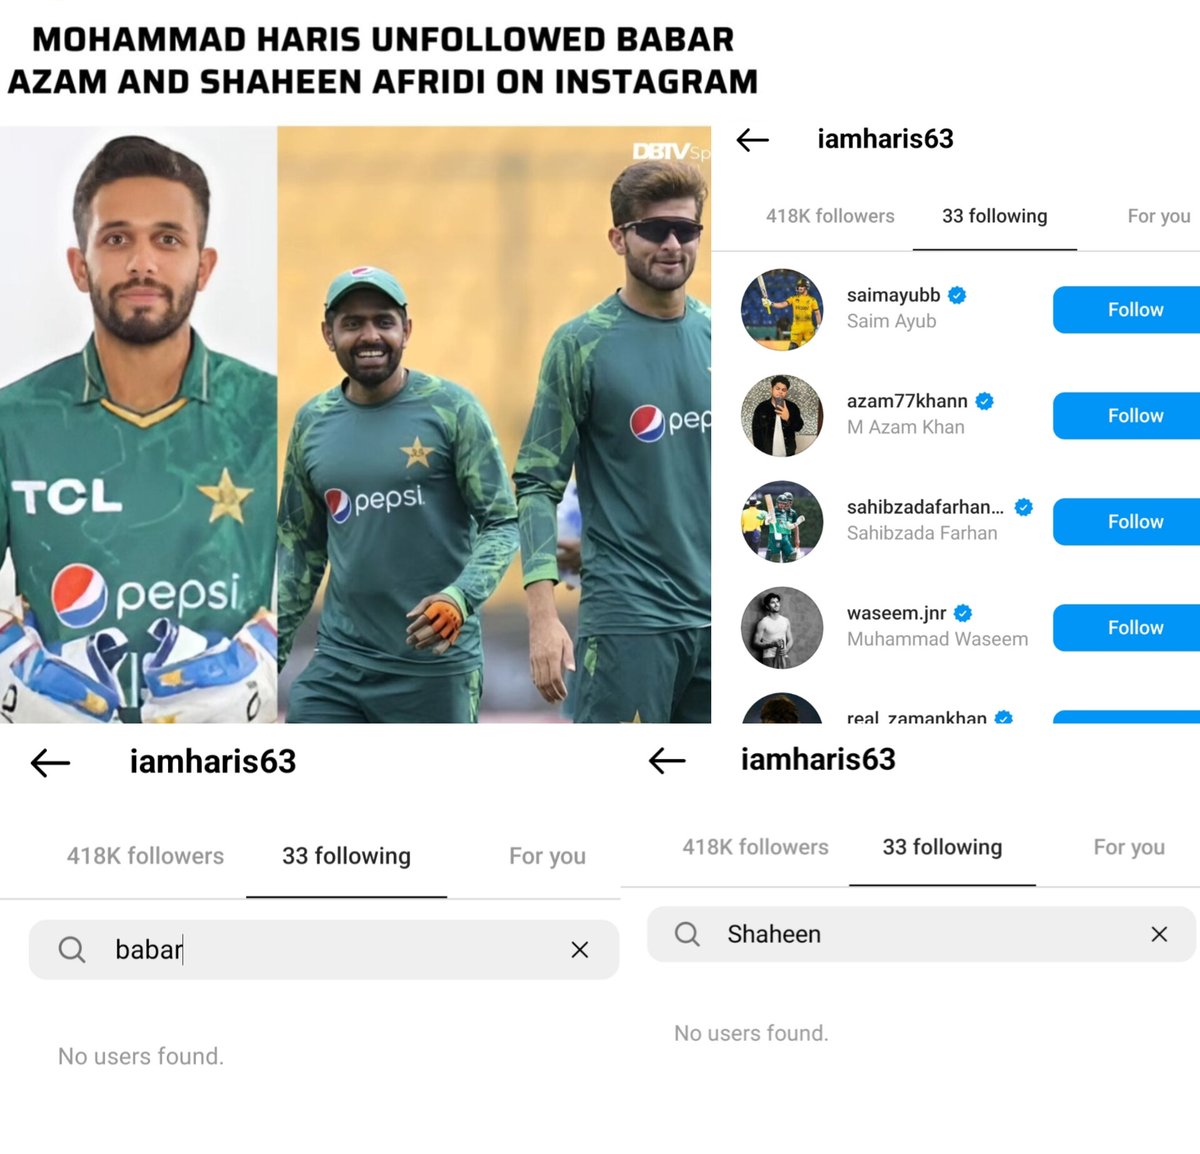 Mohammad Haris unfollowed
Babar azam and Shaheen Afridi after not being selected in the T20 WC squad.
#PakistanCricket #T20WorldCup24